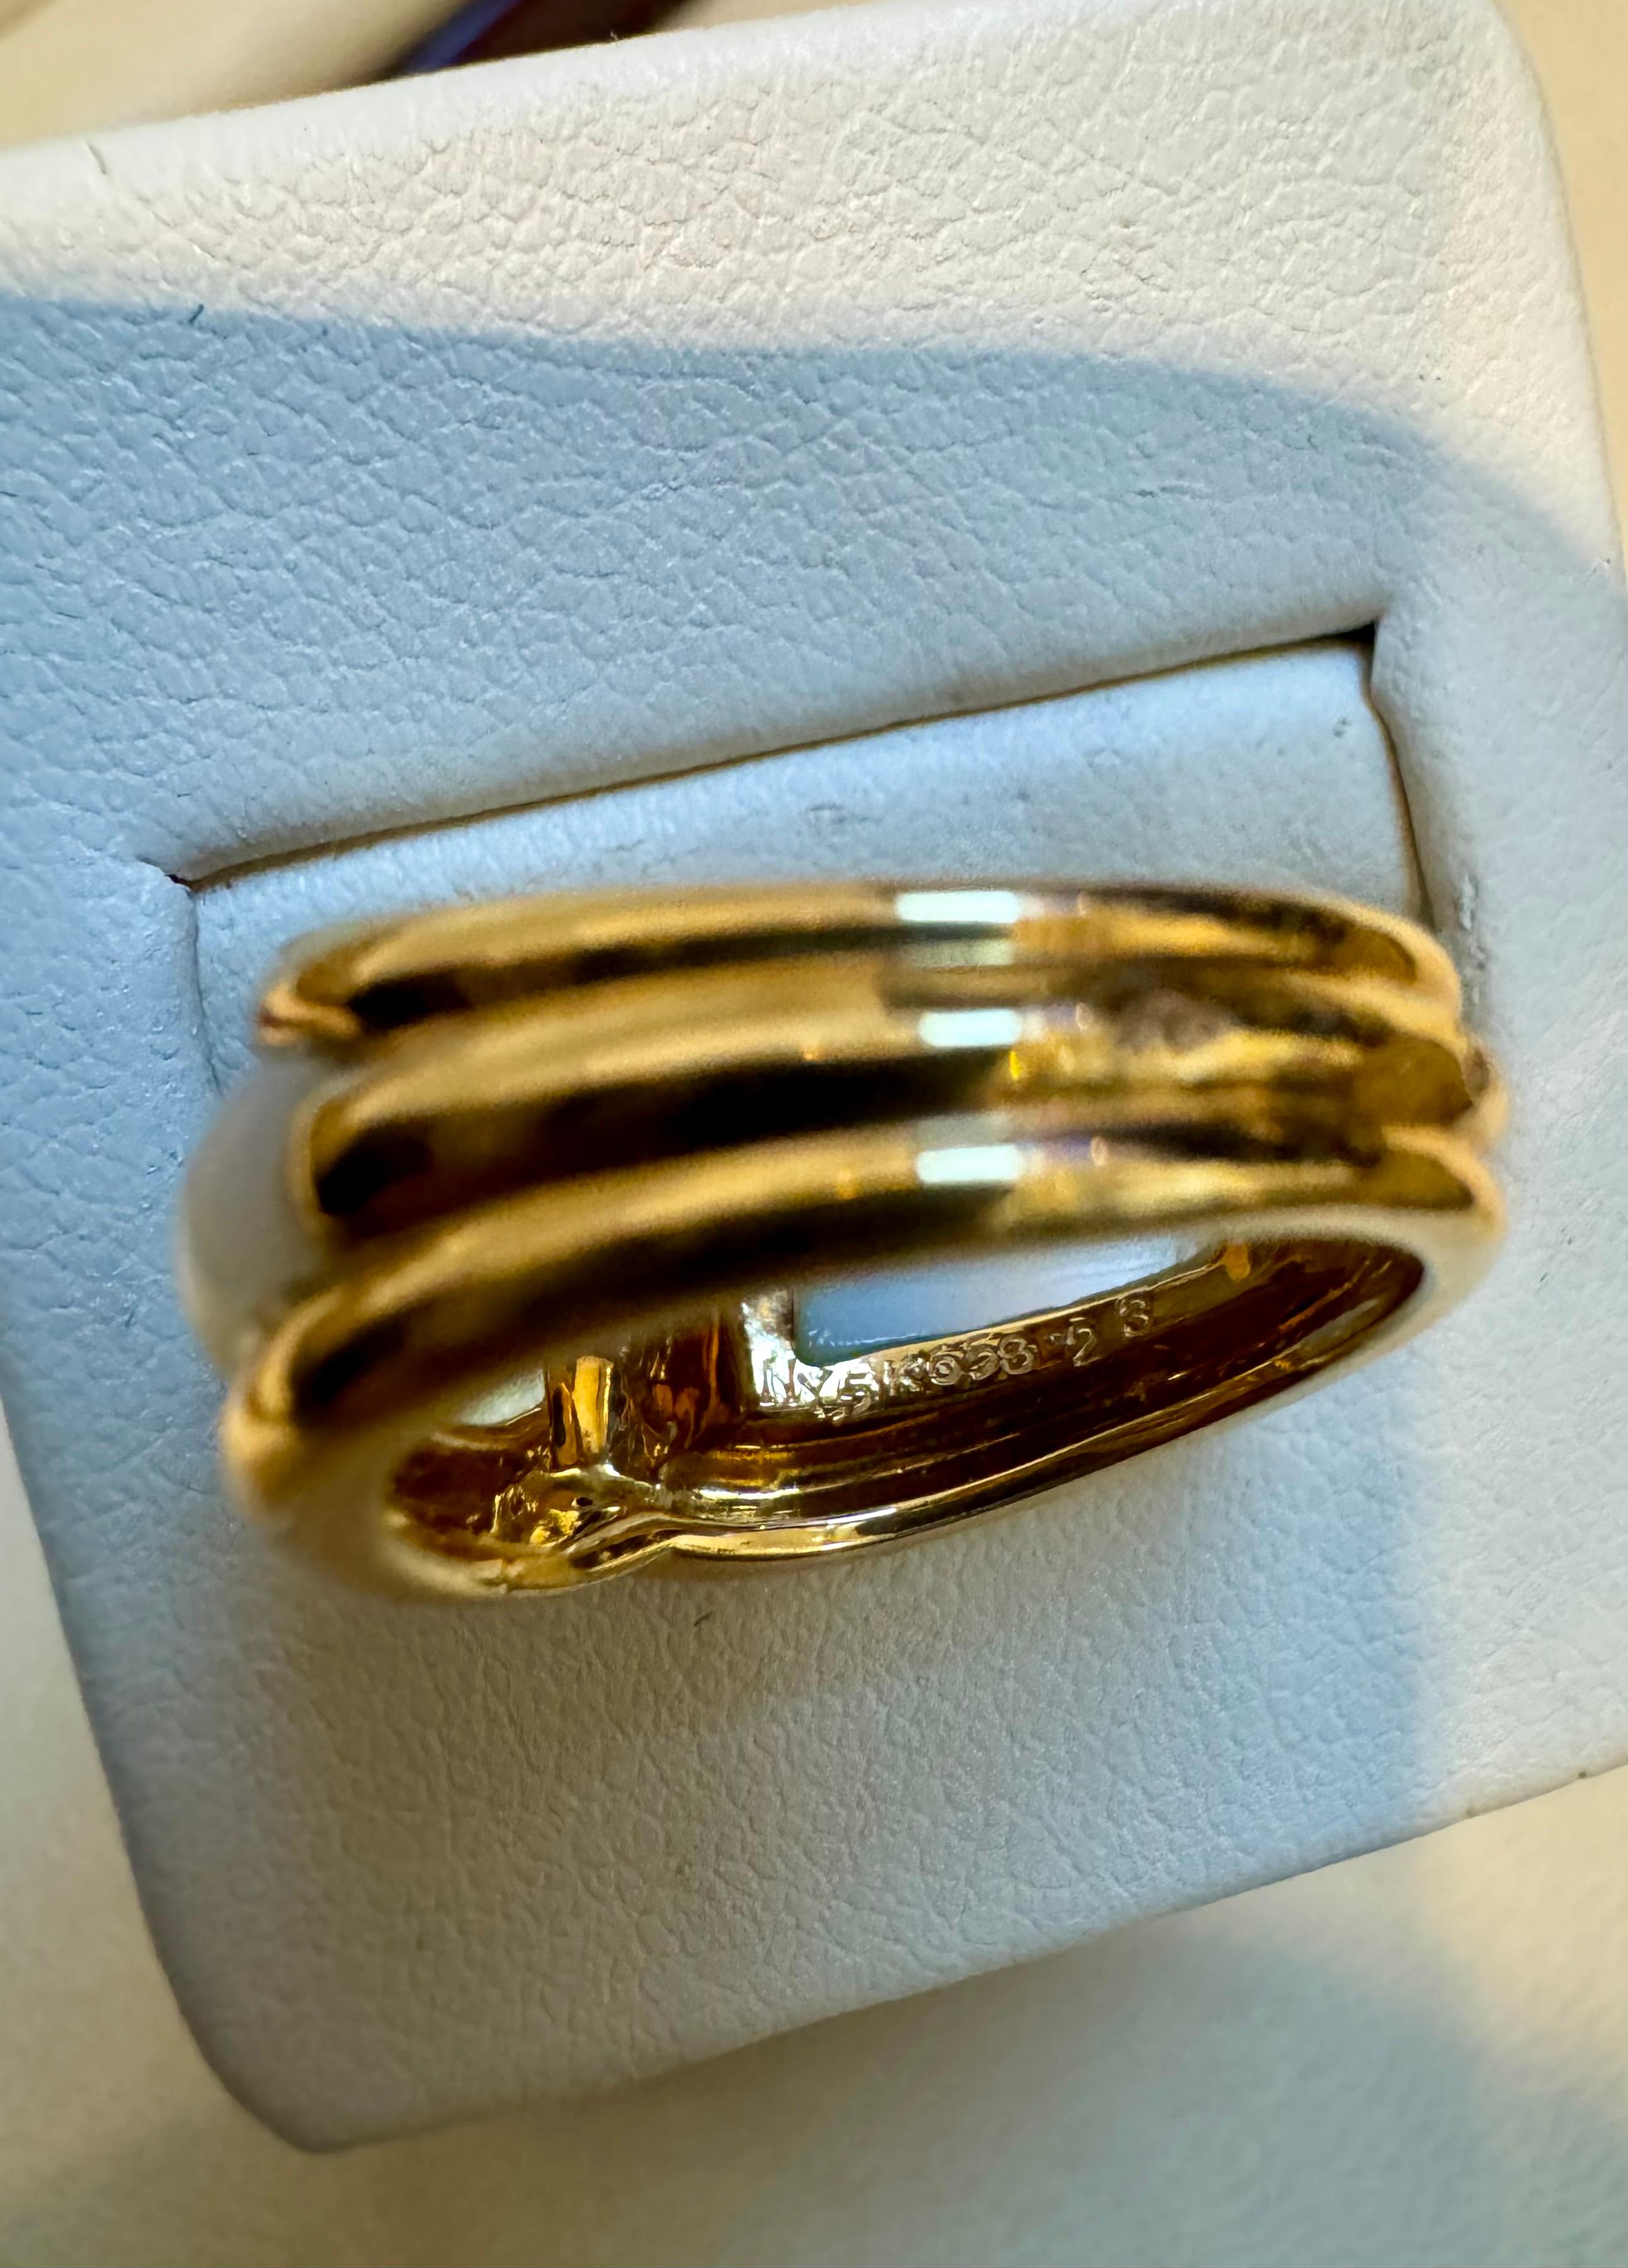 Van Cleef & Arpels Contemporary Mother of pearl “Twisted” Ring 18KY Gold Size5.5 In Excellent Condition For Sale In New York, NY